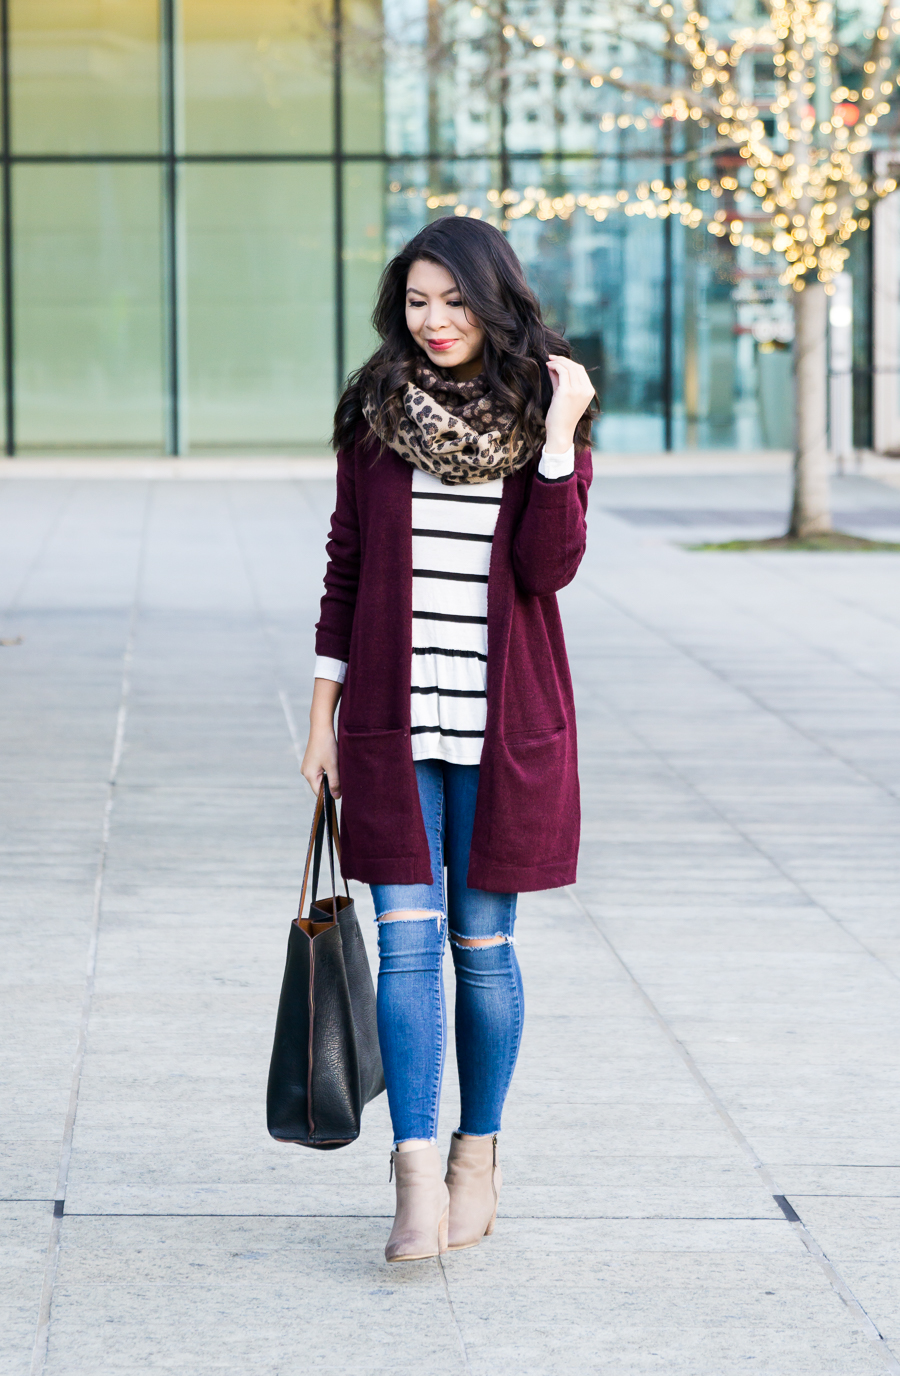 Burgundy cardigan outfit, striped top, leopard scarf, fall outfit, petite fashion blog